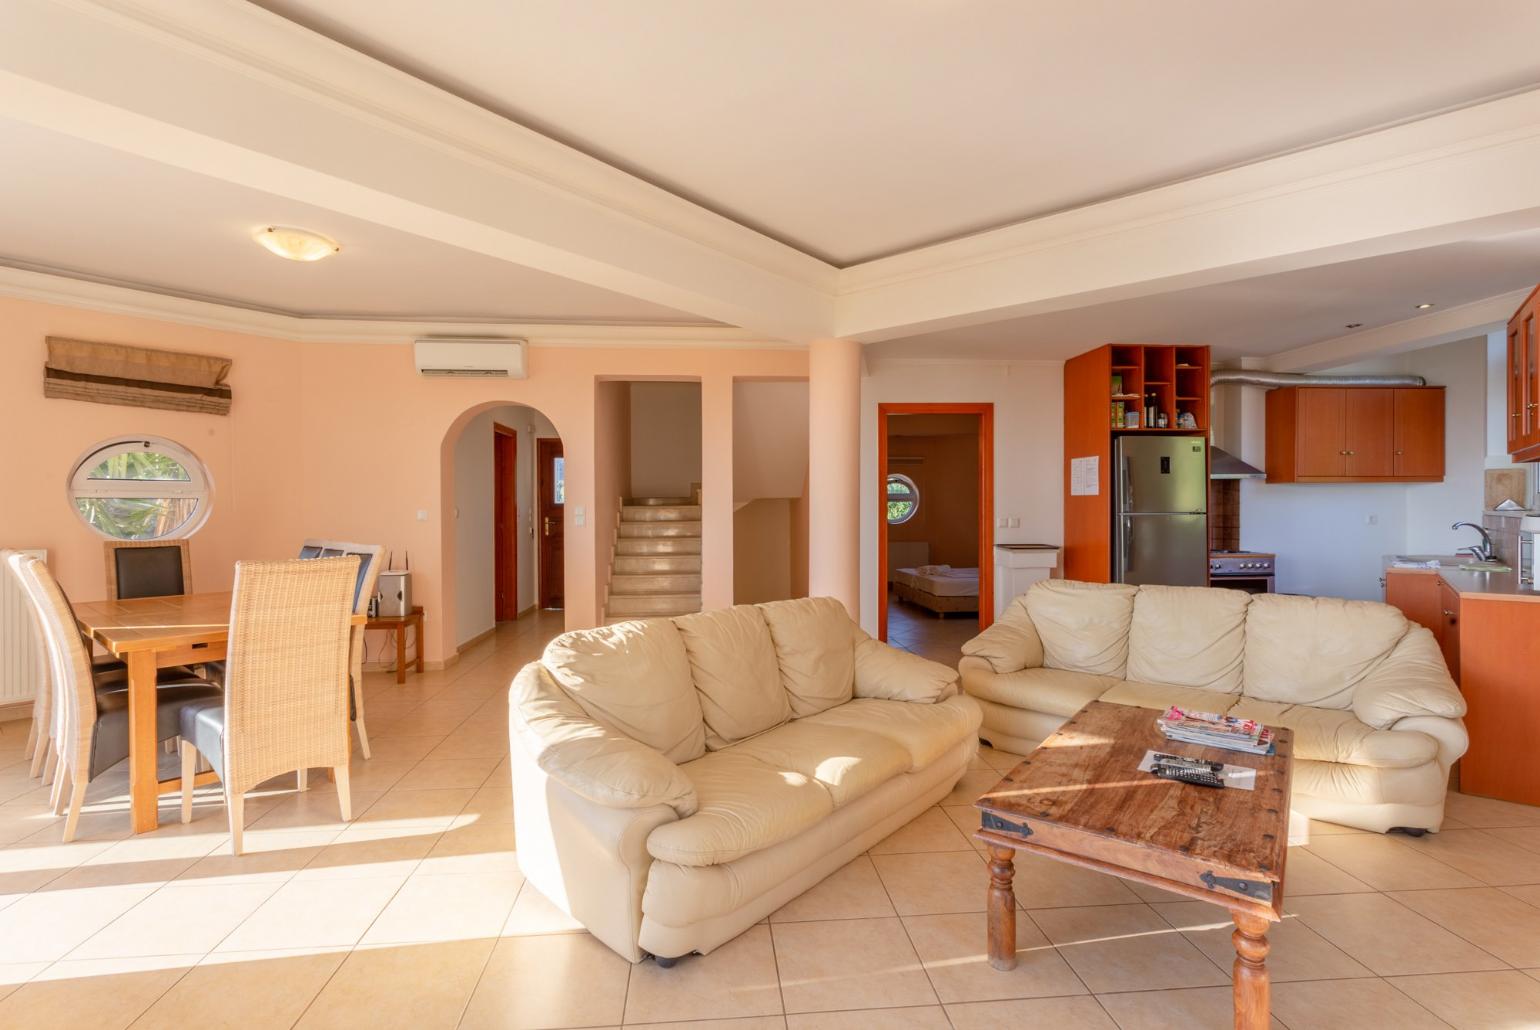 Open-plan living room on first floor with sofas, dining area, kitchen, A/C, WiFi internet, TV, DVD player, and balcony and pool terrace access